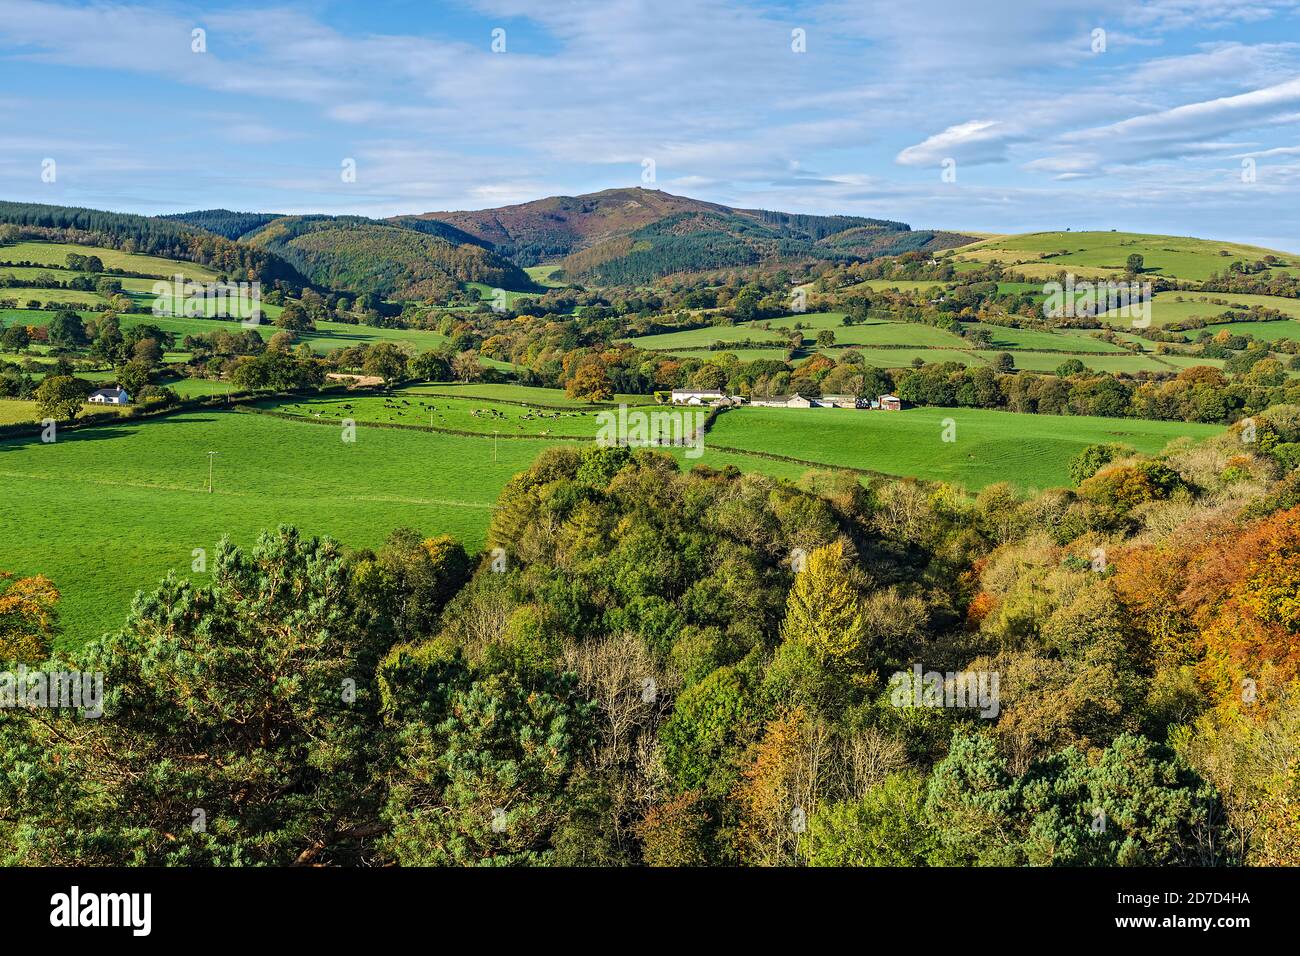 Moel Famau in the Clwydian Mountain Range viewed from Loggerheads Country Park in autumn near Mold North Wales UK October 2019 2571 Stock Photo